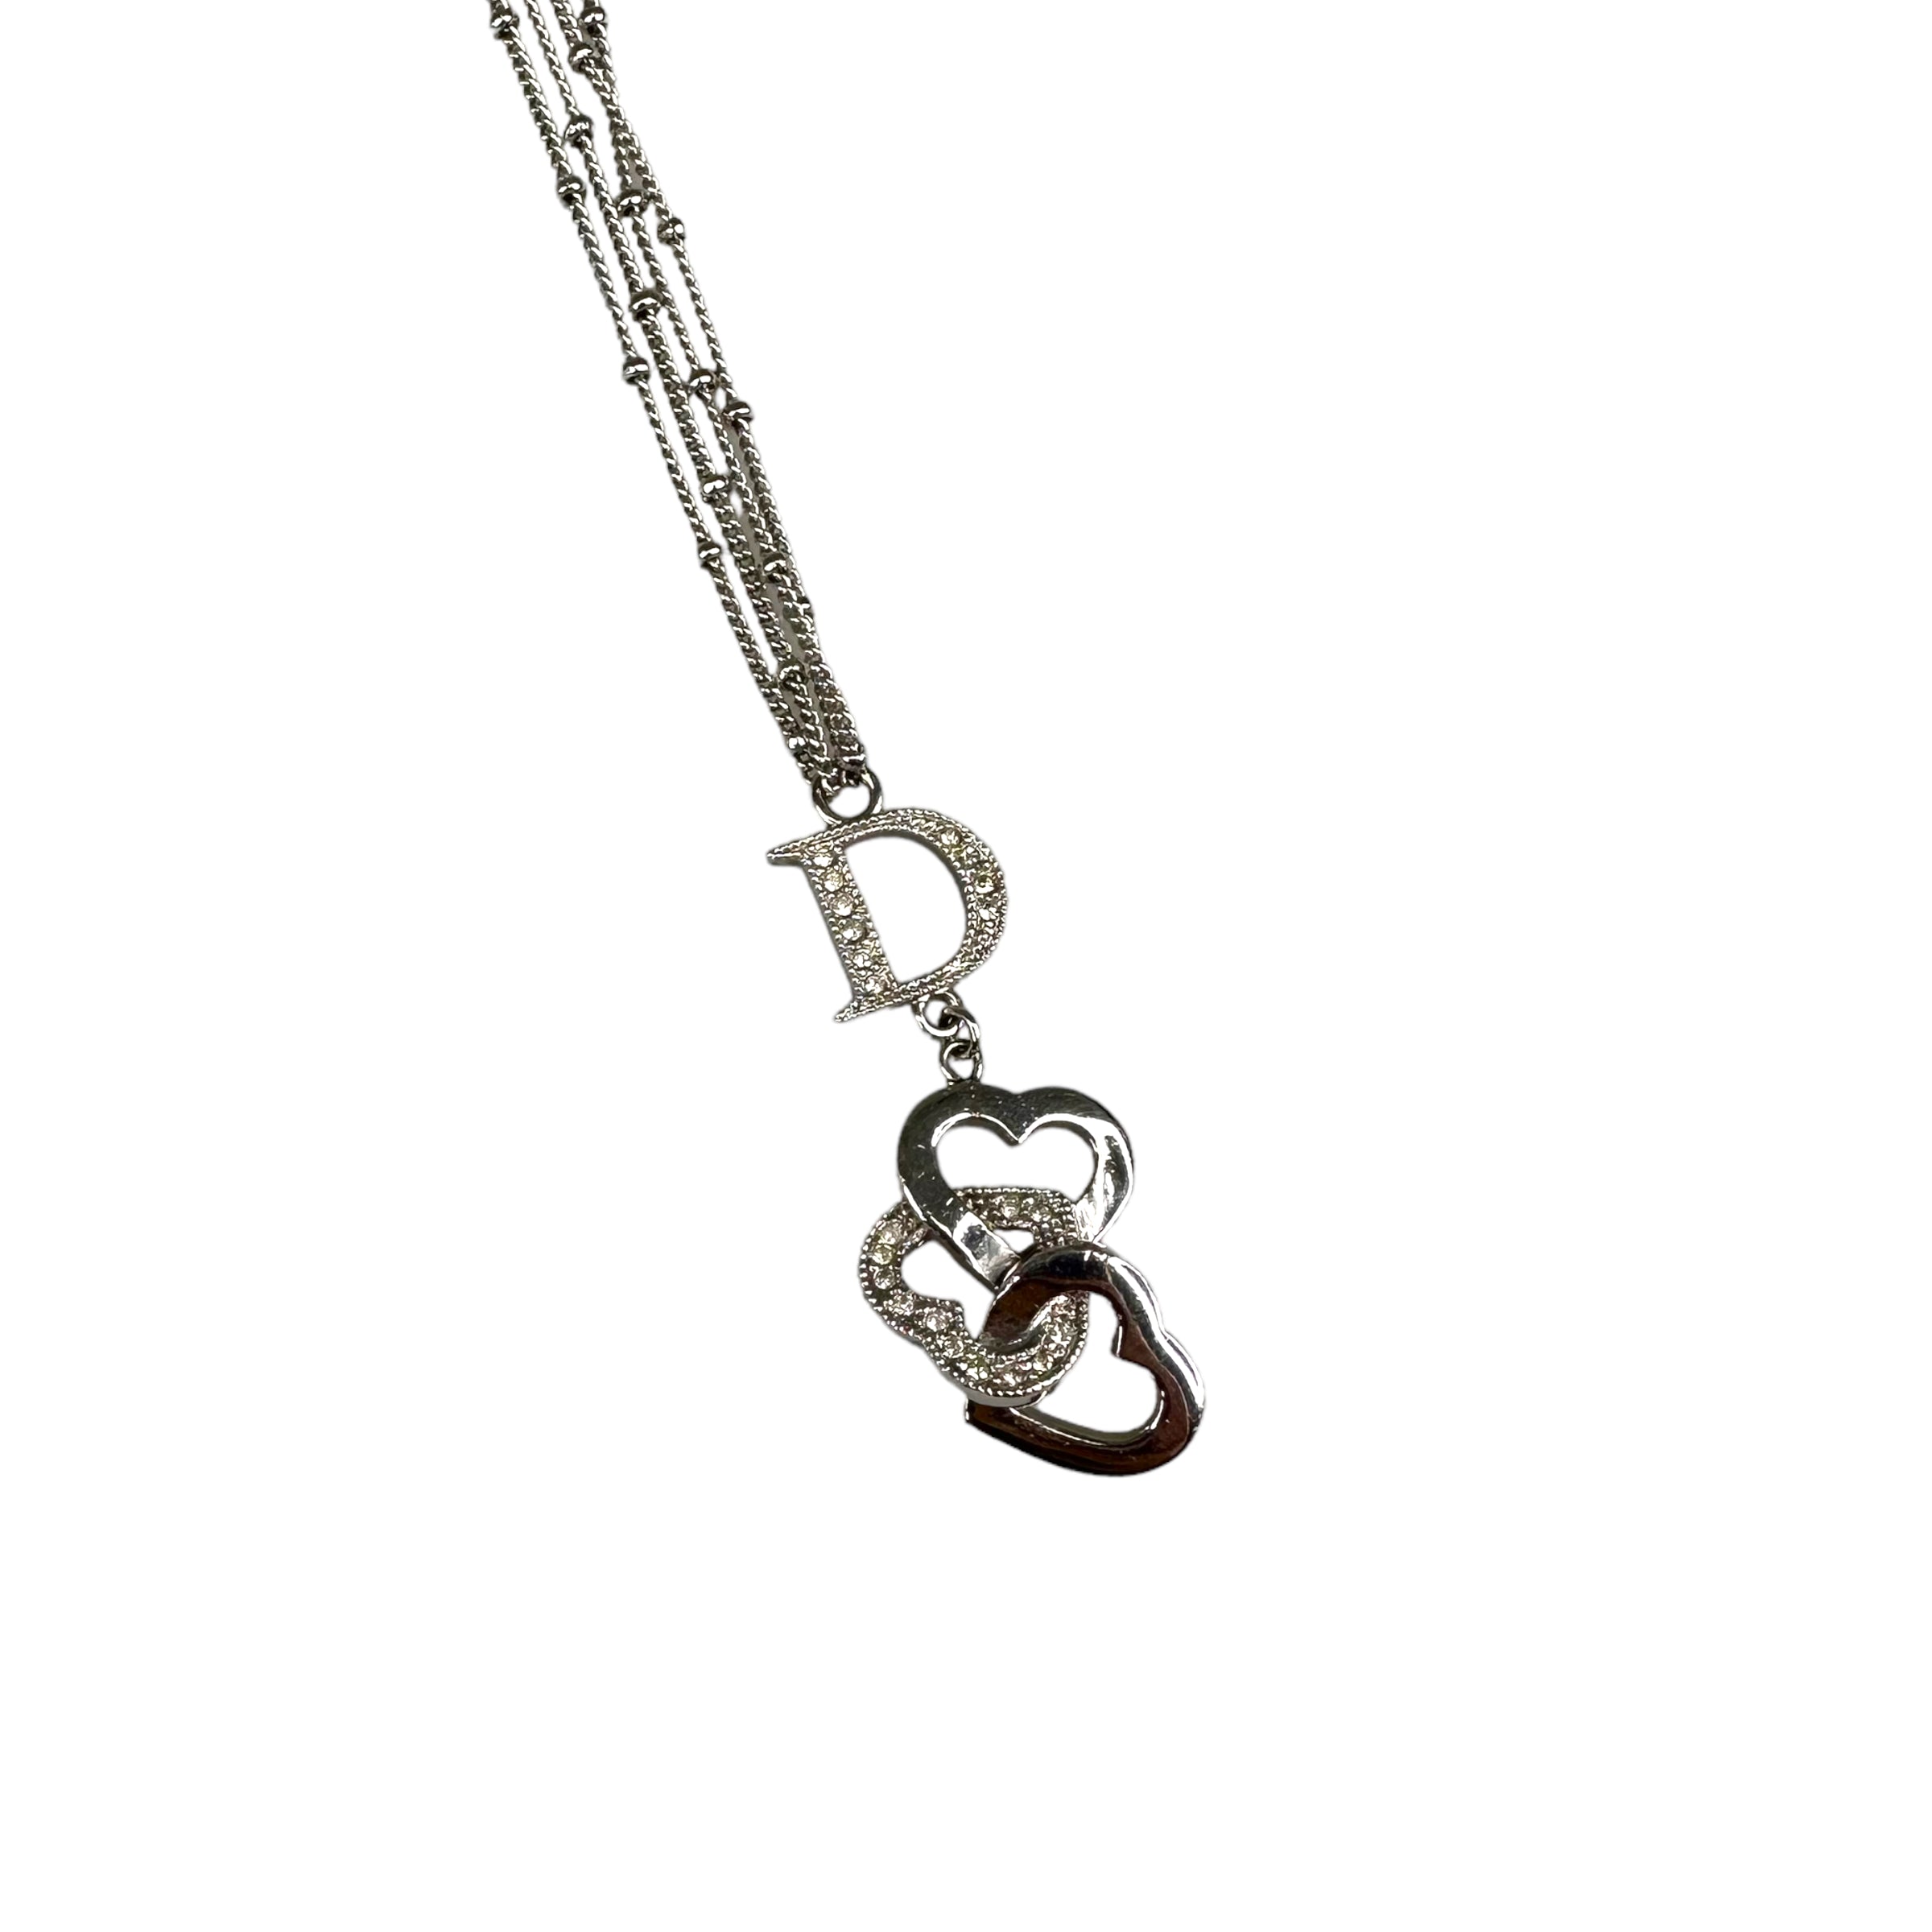 DIOR RHINESTONE "D" AND INTERLOCKED HEARTS SILVER-PLATED NECKLACE